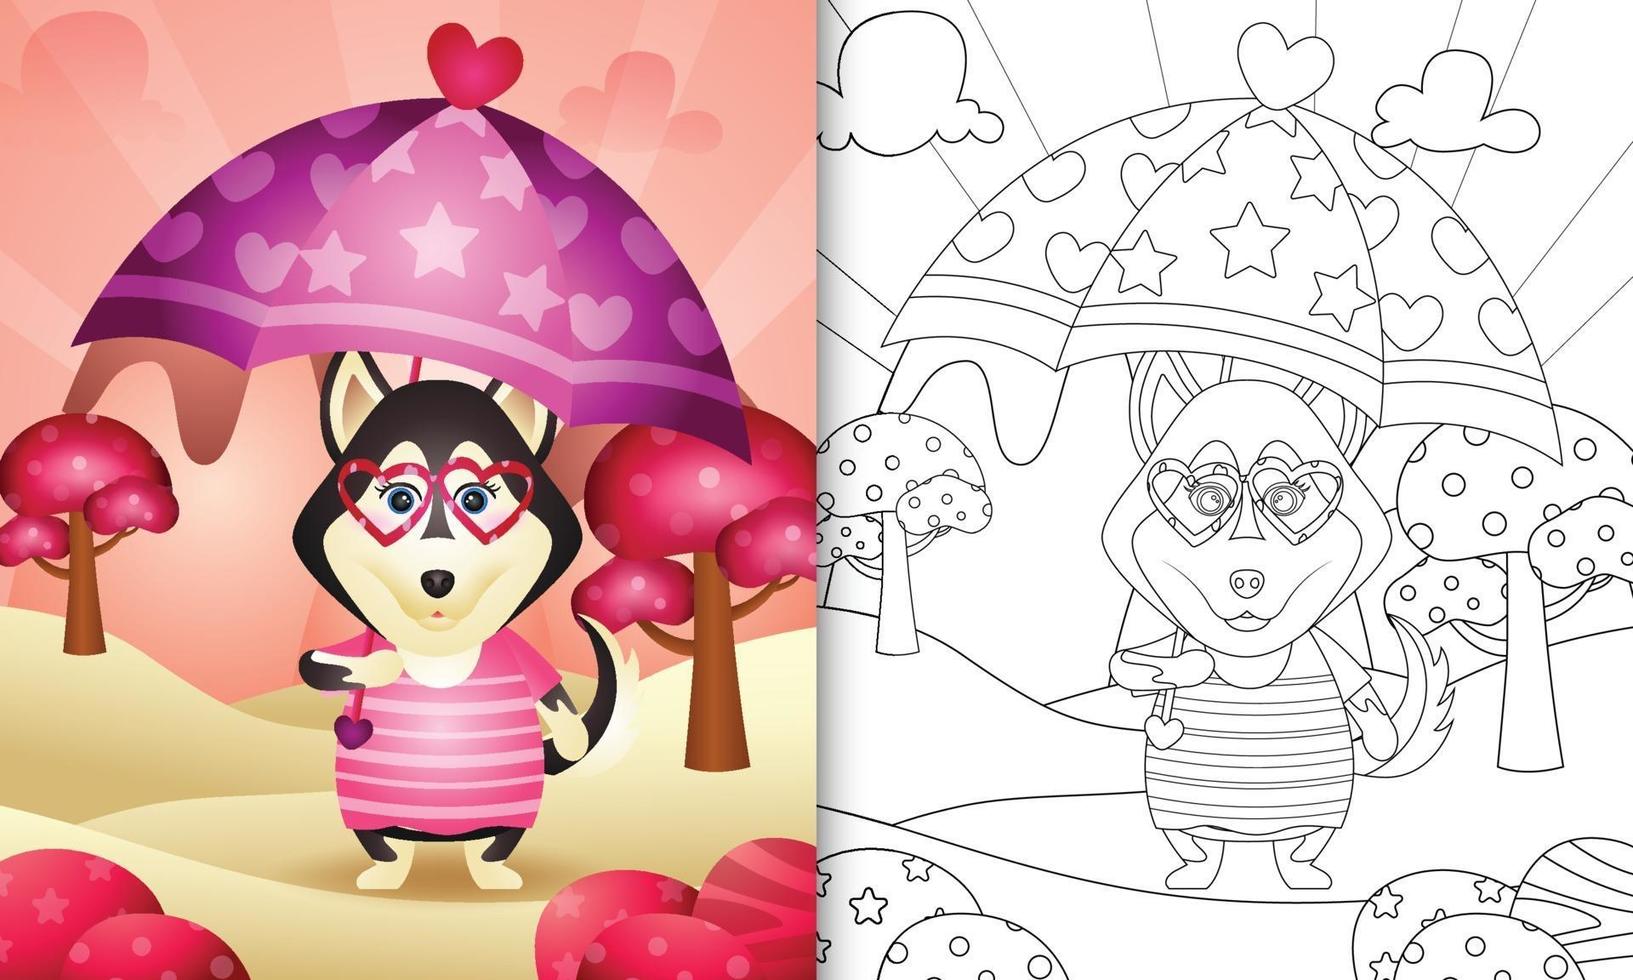 coloring book for kids with a cute husky dog holding umbrella themed valentine day vector